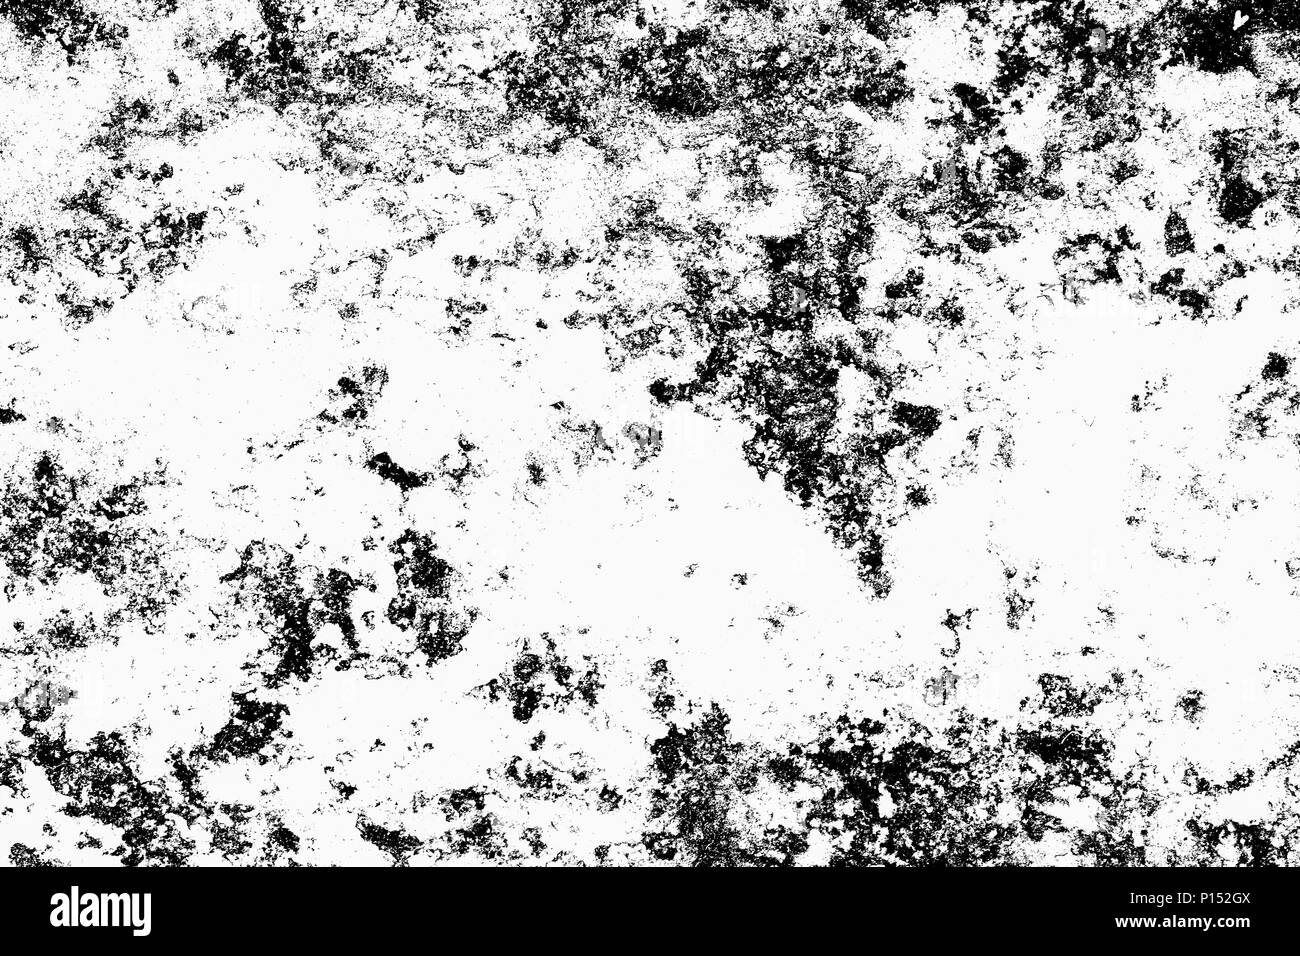 Grunge black and white Urban texture. Place over any object create black grunge effect. Distress grunge texture easy to use overlay. Distress grain ov Stock Photo